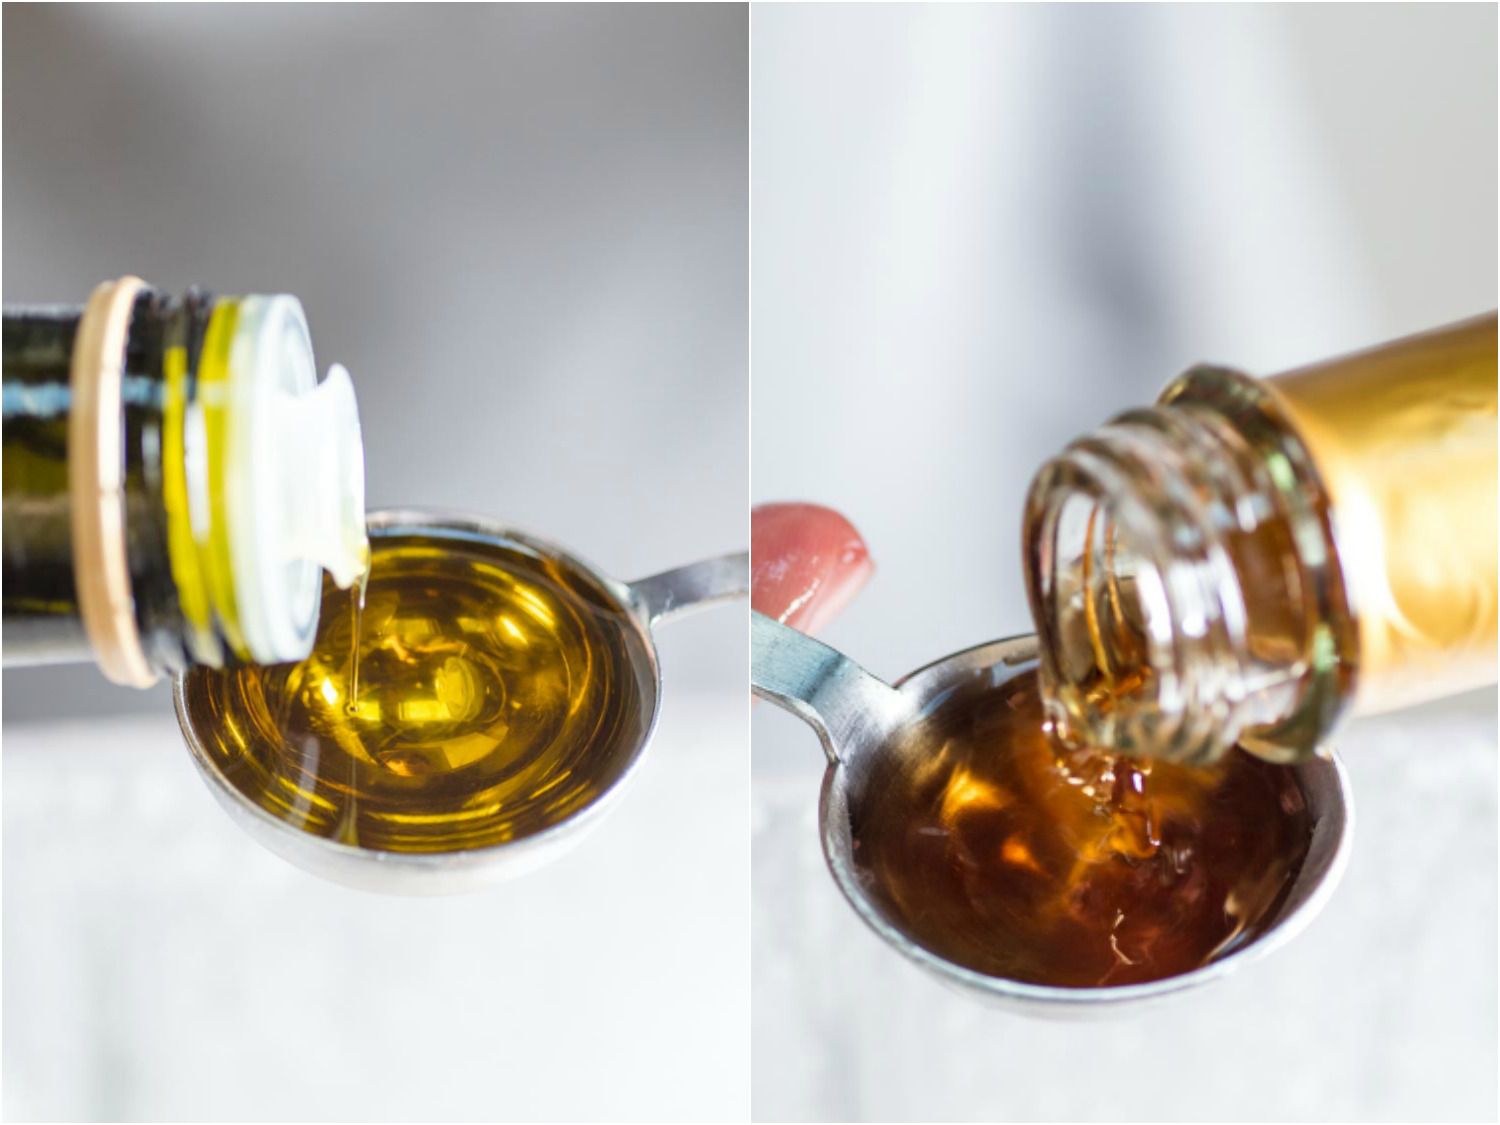 On the left: olive oil being poured into a tablespoon. On the right: sherry vinegar being poured into a tablespoon.